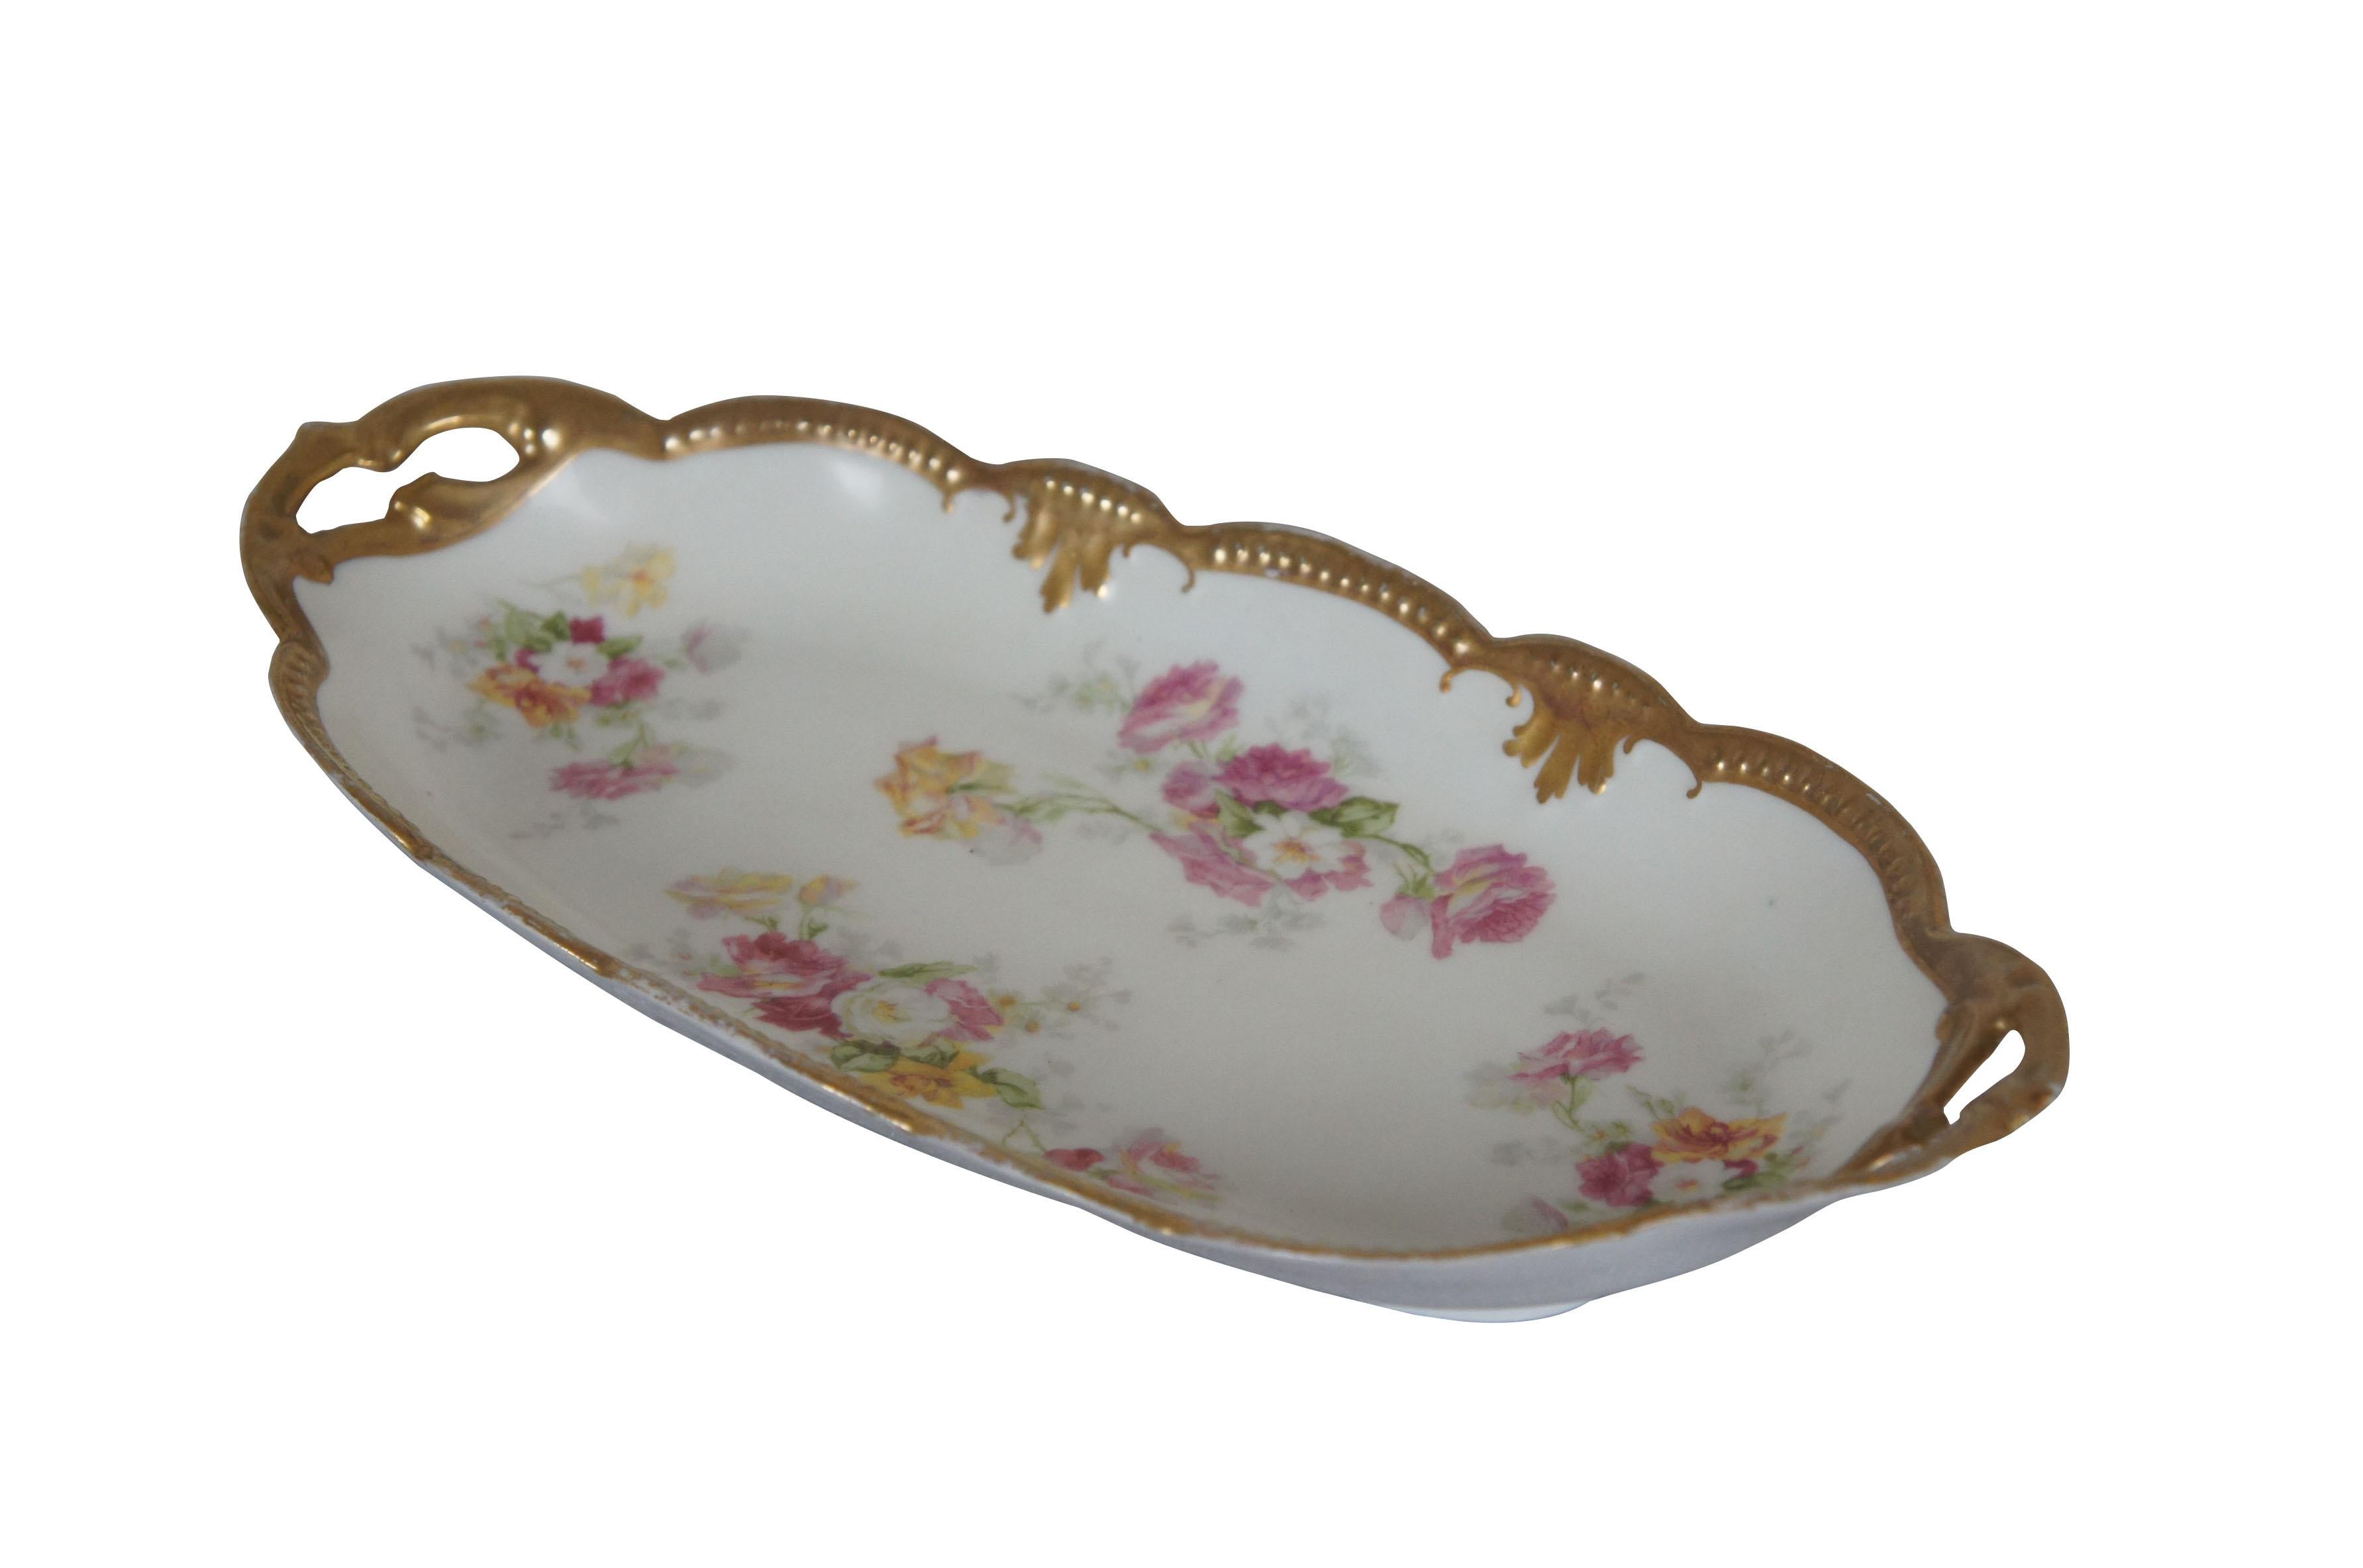 Early 20th century Limoges porcelain serving dish / vanity tray by Alfred Klingenberg and Charles Dwenger. Long oval shape with scalloped edges and pierced handles. Gilded border. Sprays of pink, yellow, and green flowers. Mark used circa